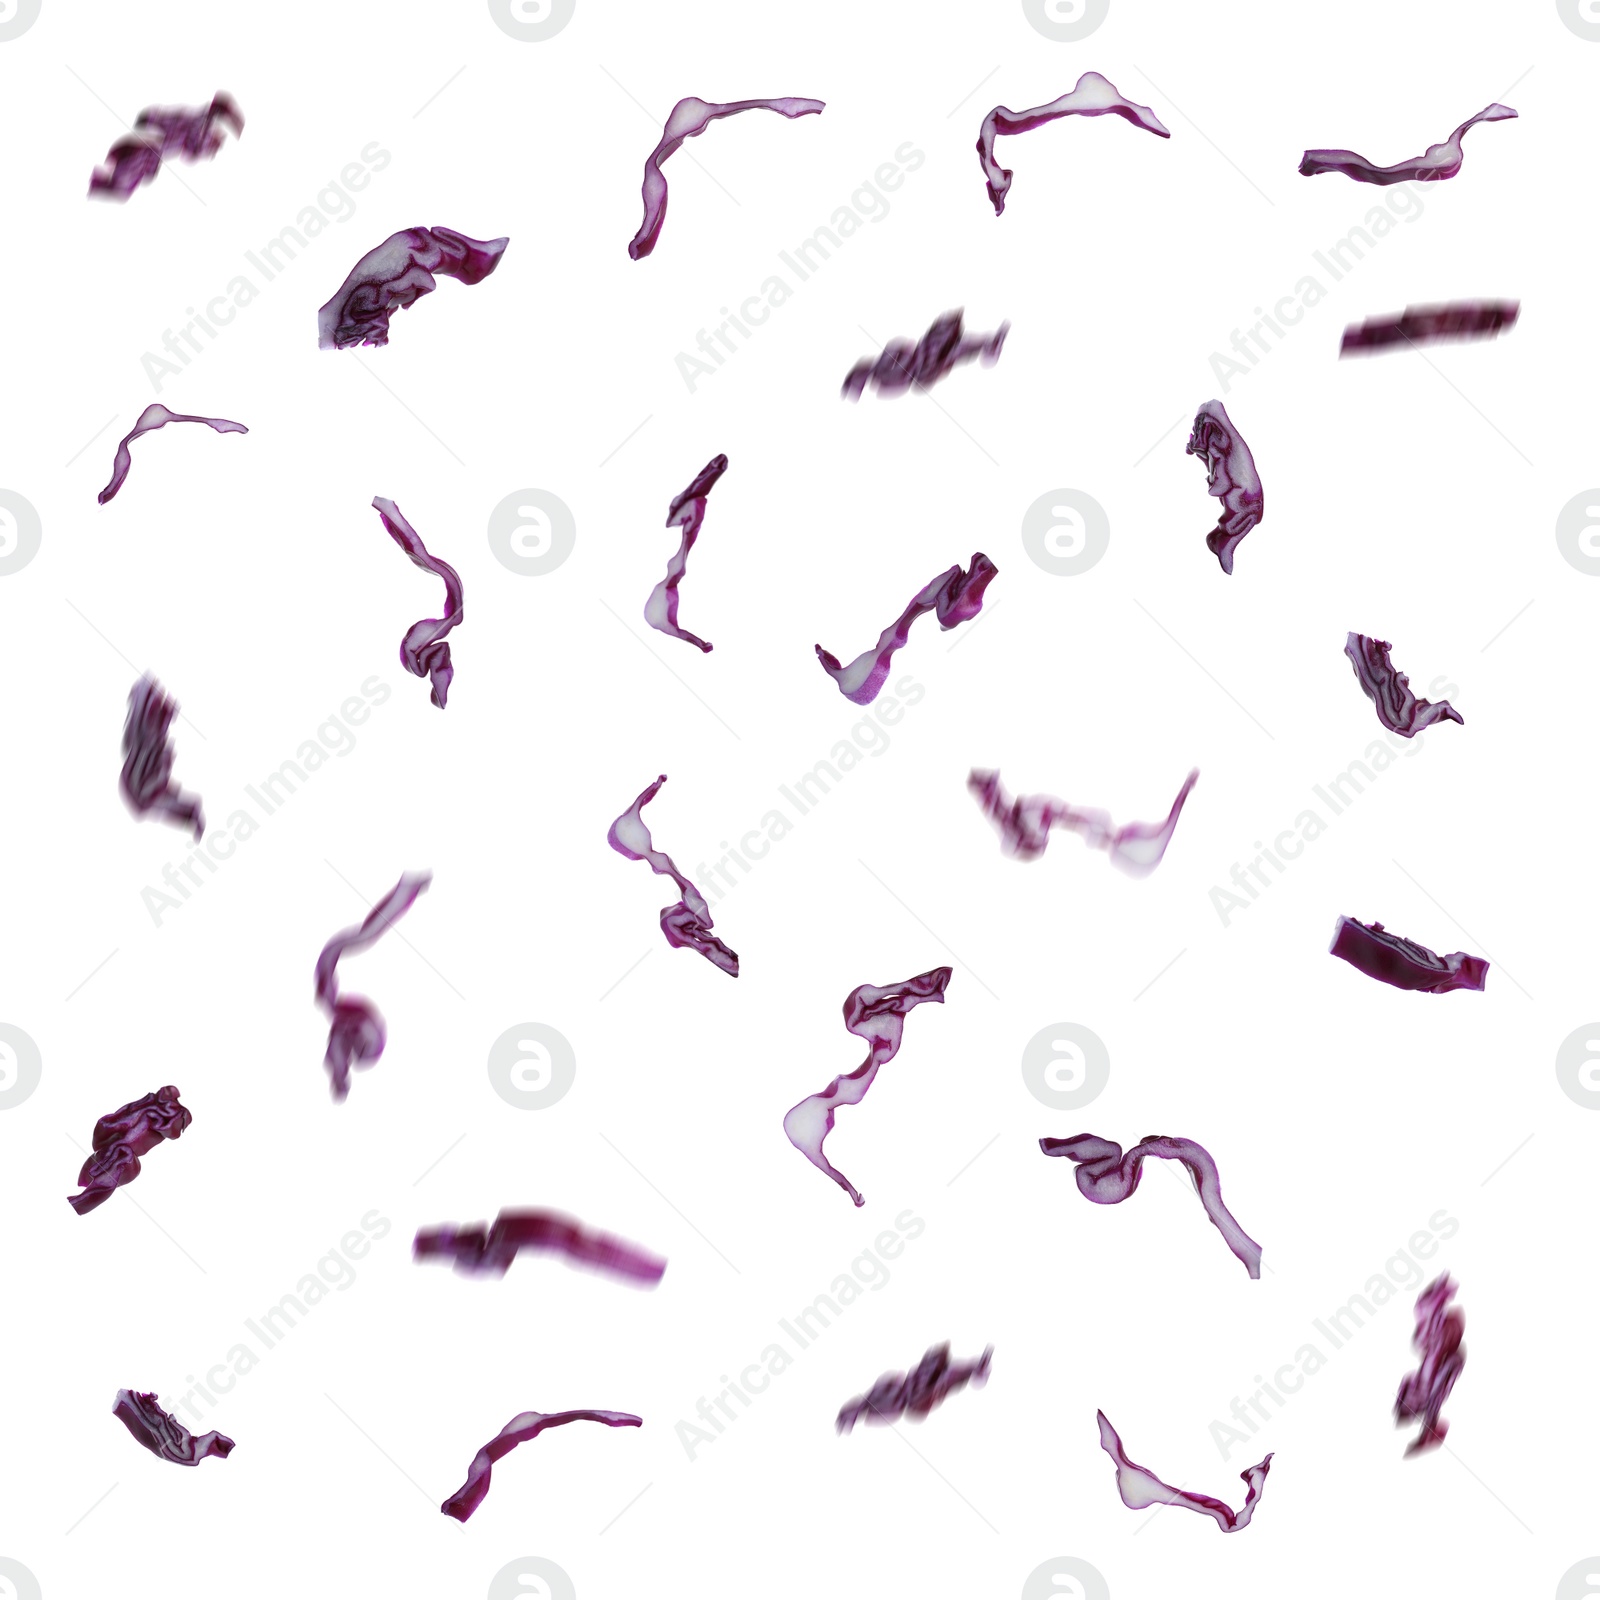 Image of Set  with falling fresh pieces of red cabbage on white background